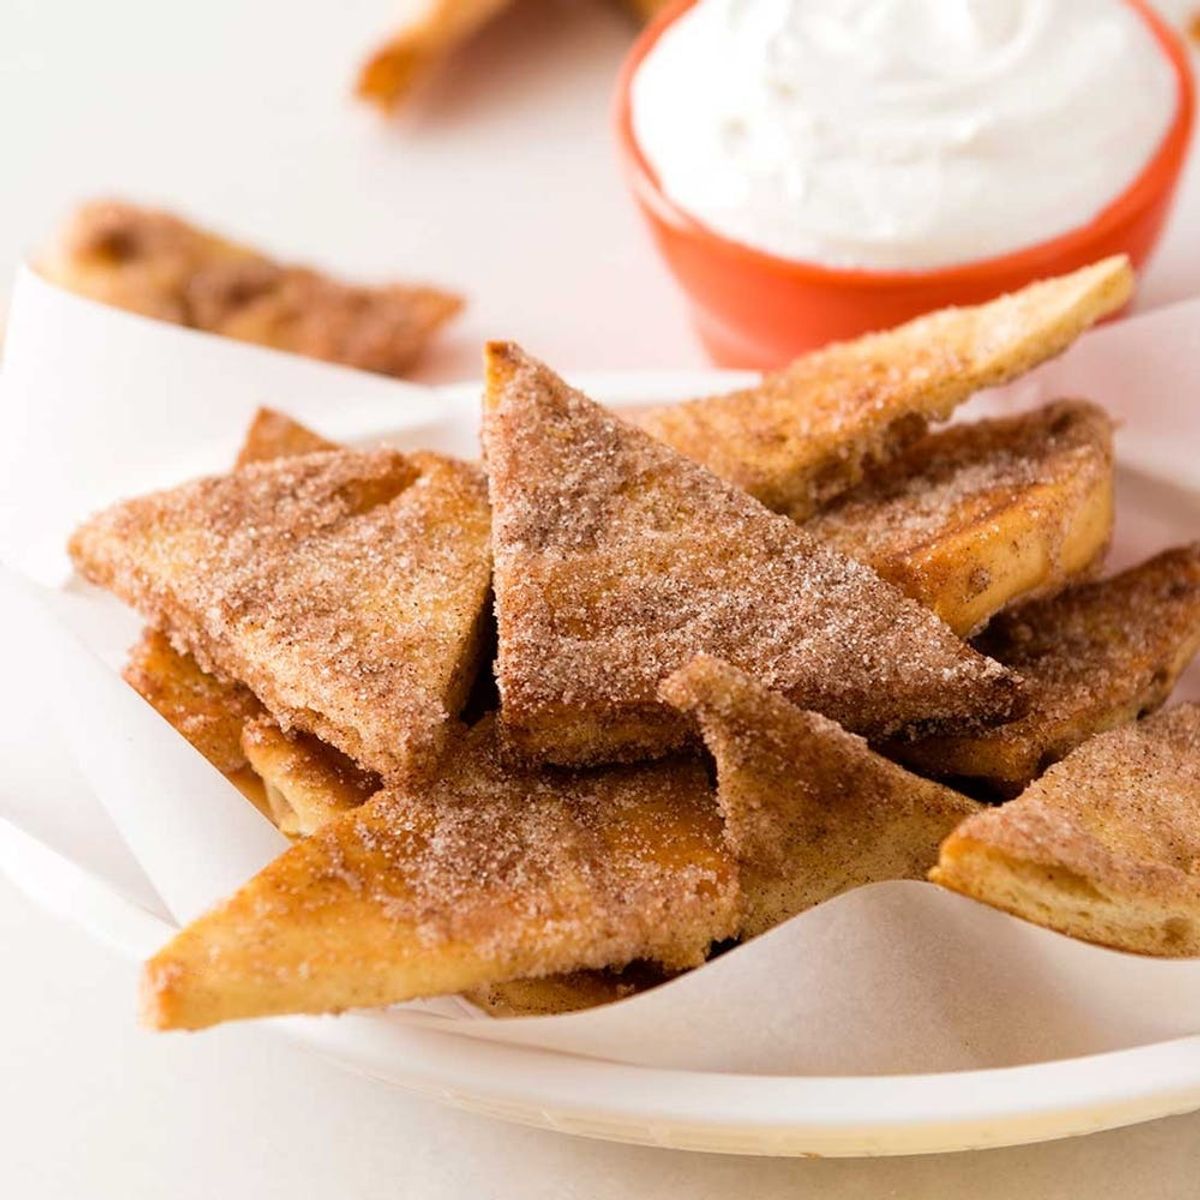 Make Your Dessert Dreams Come True With This Baked Churro Chips Recipe